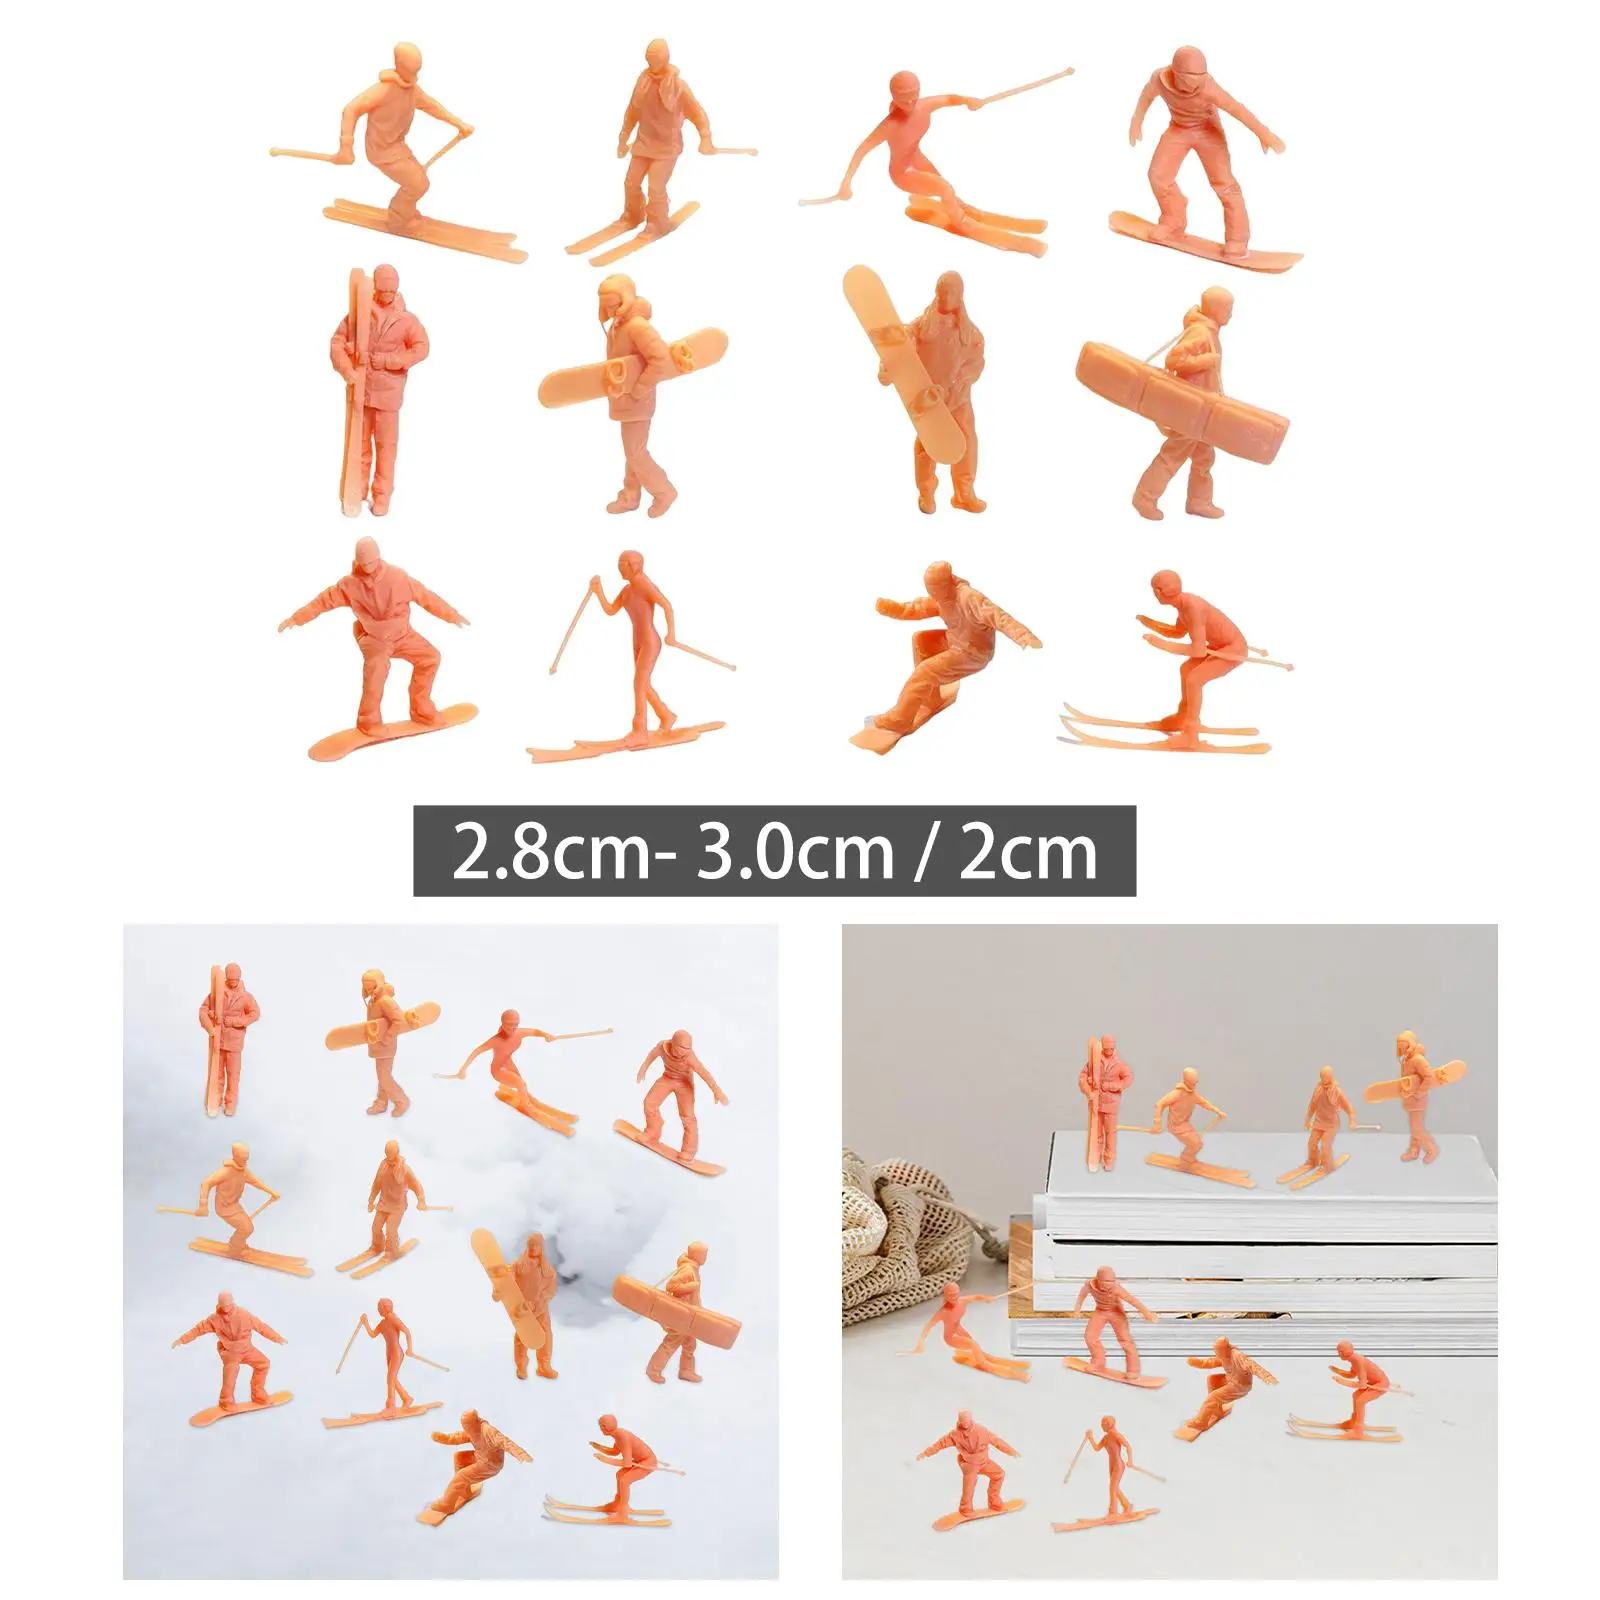 Simulation Skiing Figures Scenery Landscape Layout Doll Model for DIY Scene Architecture Model Ornament Accessories Collectible